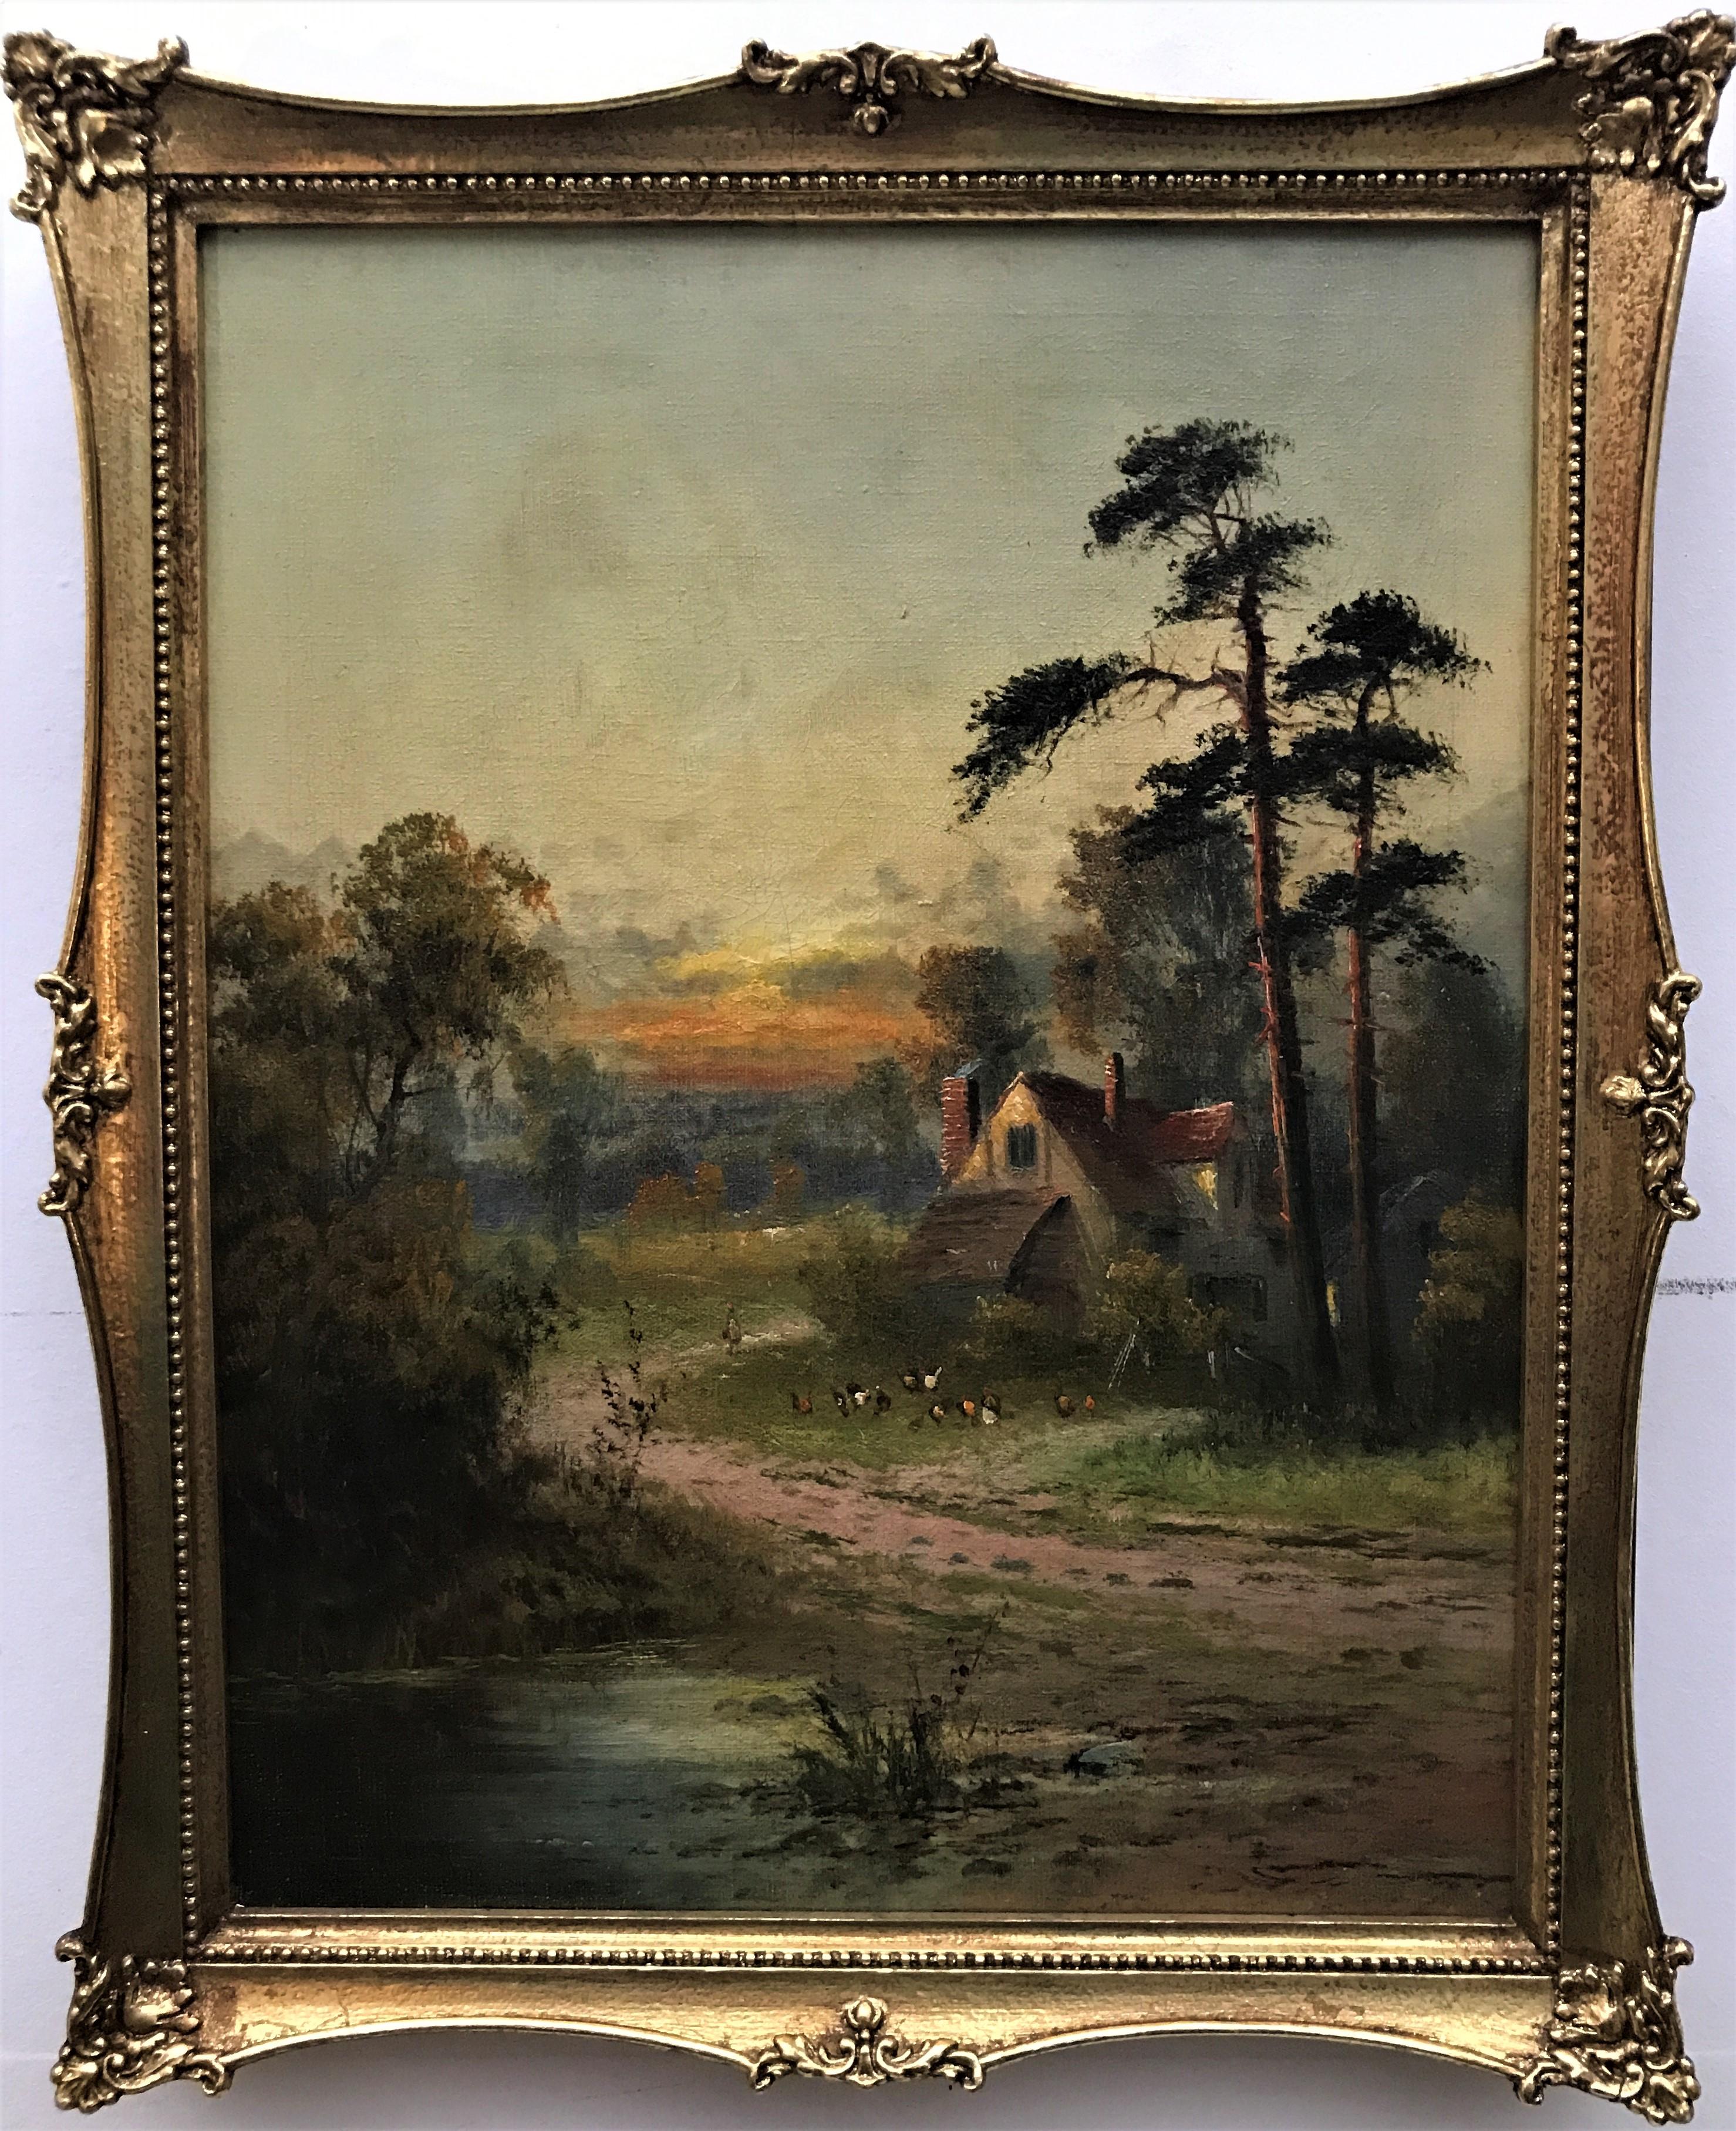 Landscape with Cottage, original oil on canvas, realist style, 20th Century - Painting by George Hider